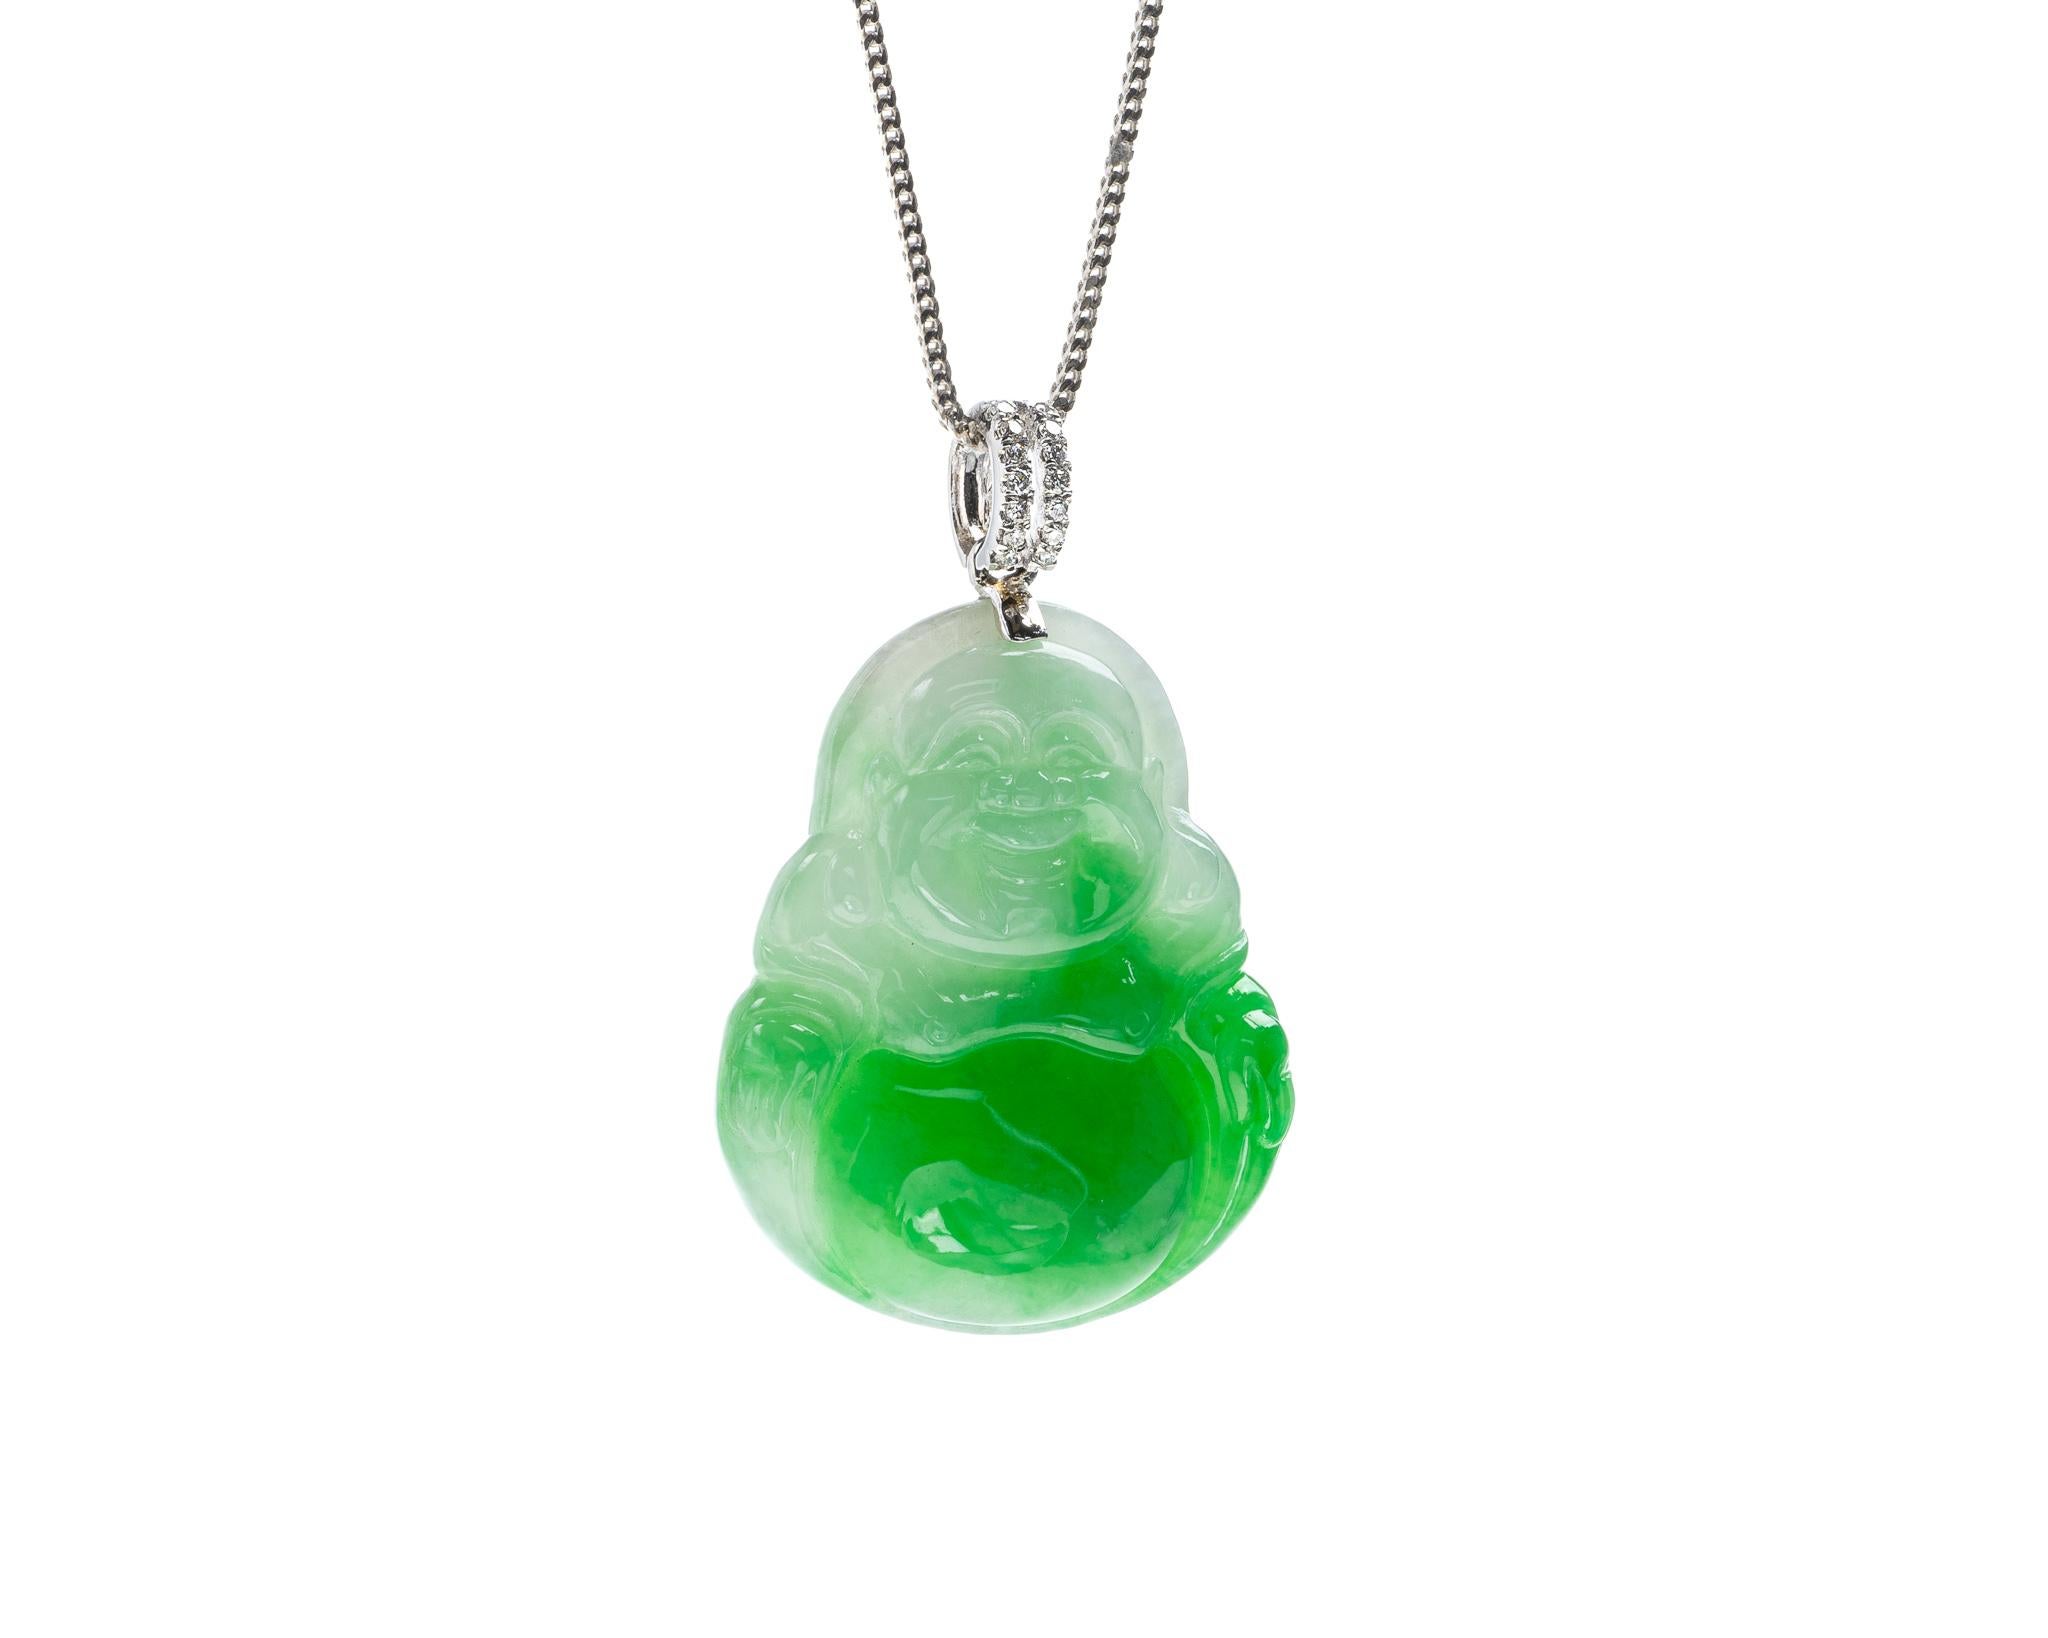 This is an all natural, untreated jadeite jade carved happy buddha pendant set on an 18K white gold and diamond bail.  The carved buddha symbolizes peace and compassion.
   
It measures 0.97 inches (24.8 mm) x 1.48 inches (37.7 mm) with thickness of